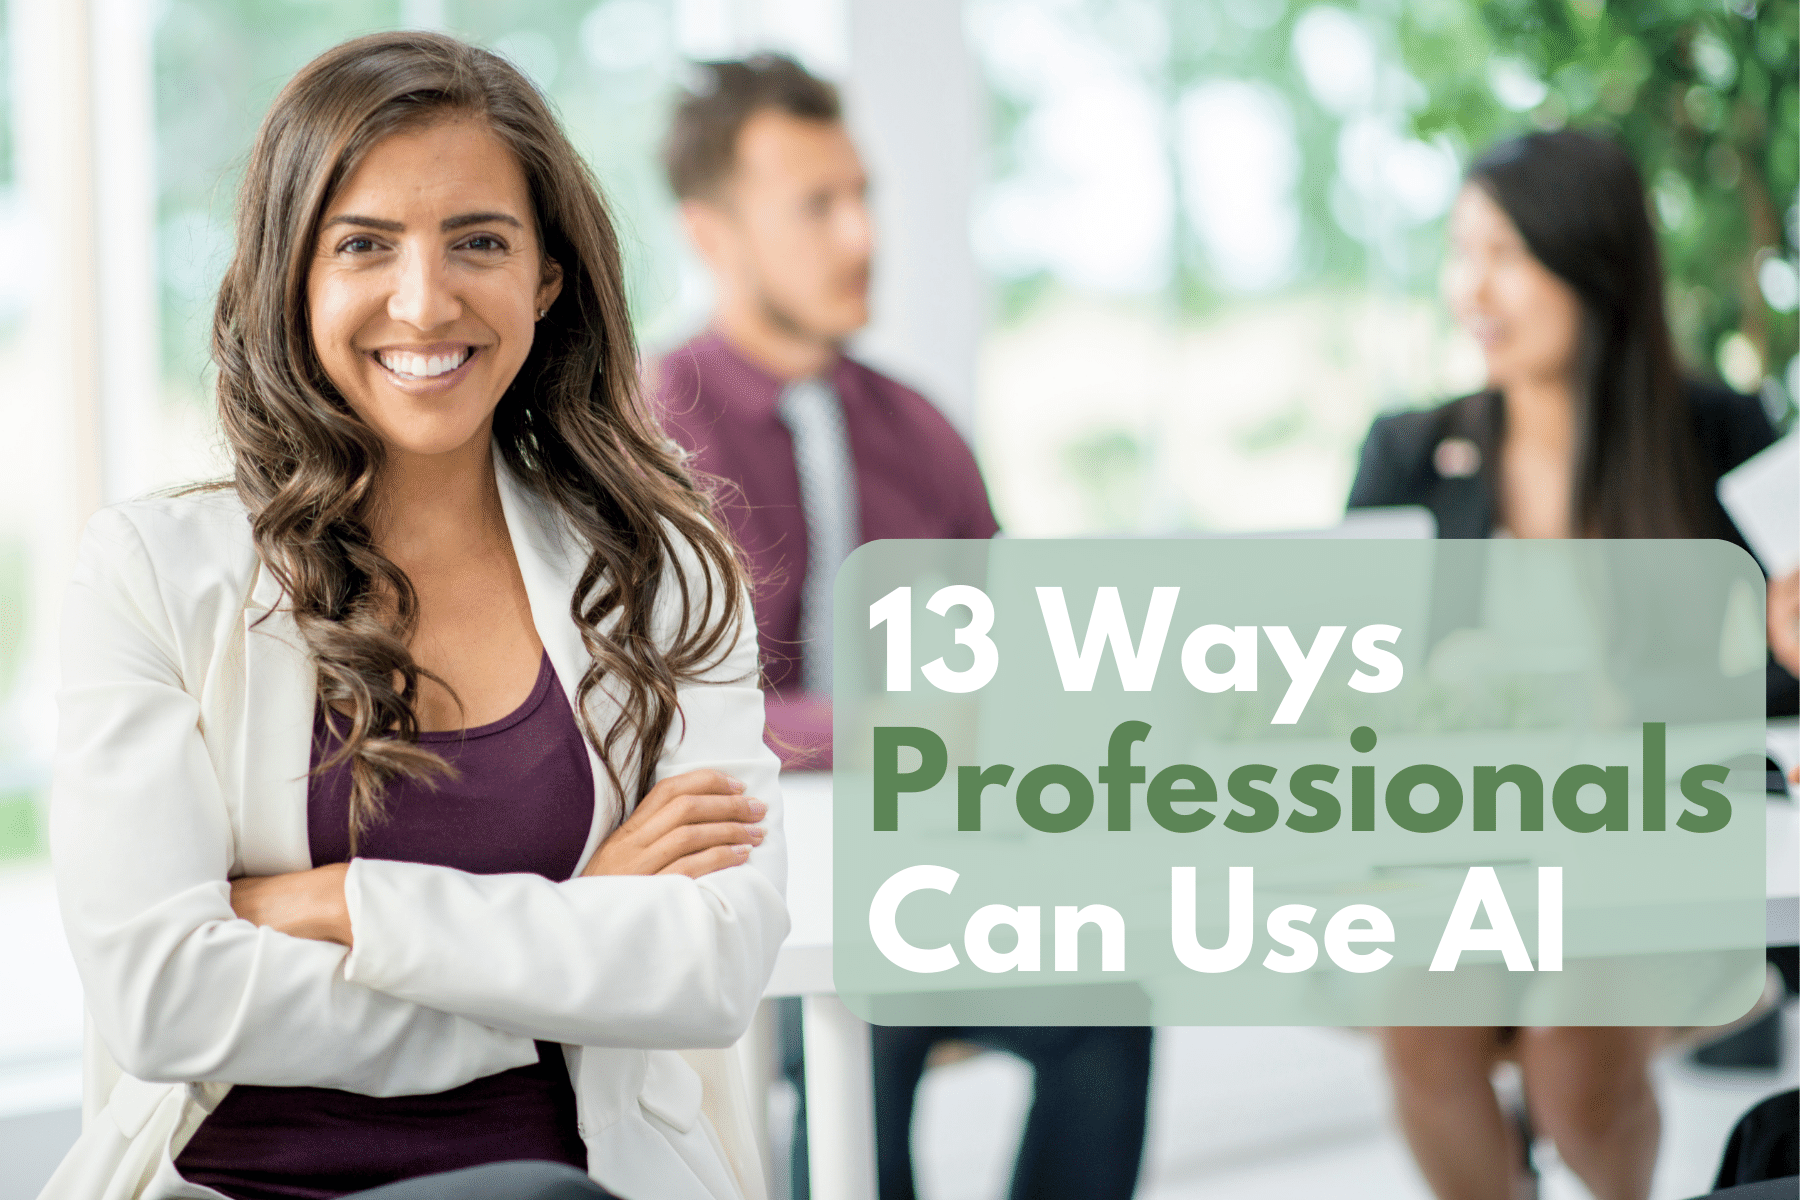 13 Ways Professionals Can Use AI to Gain the Upper Hand